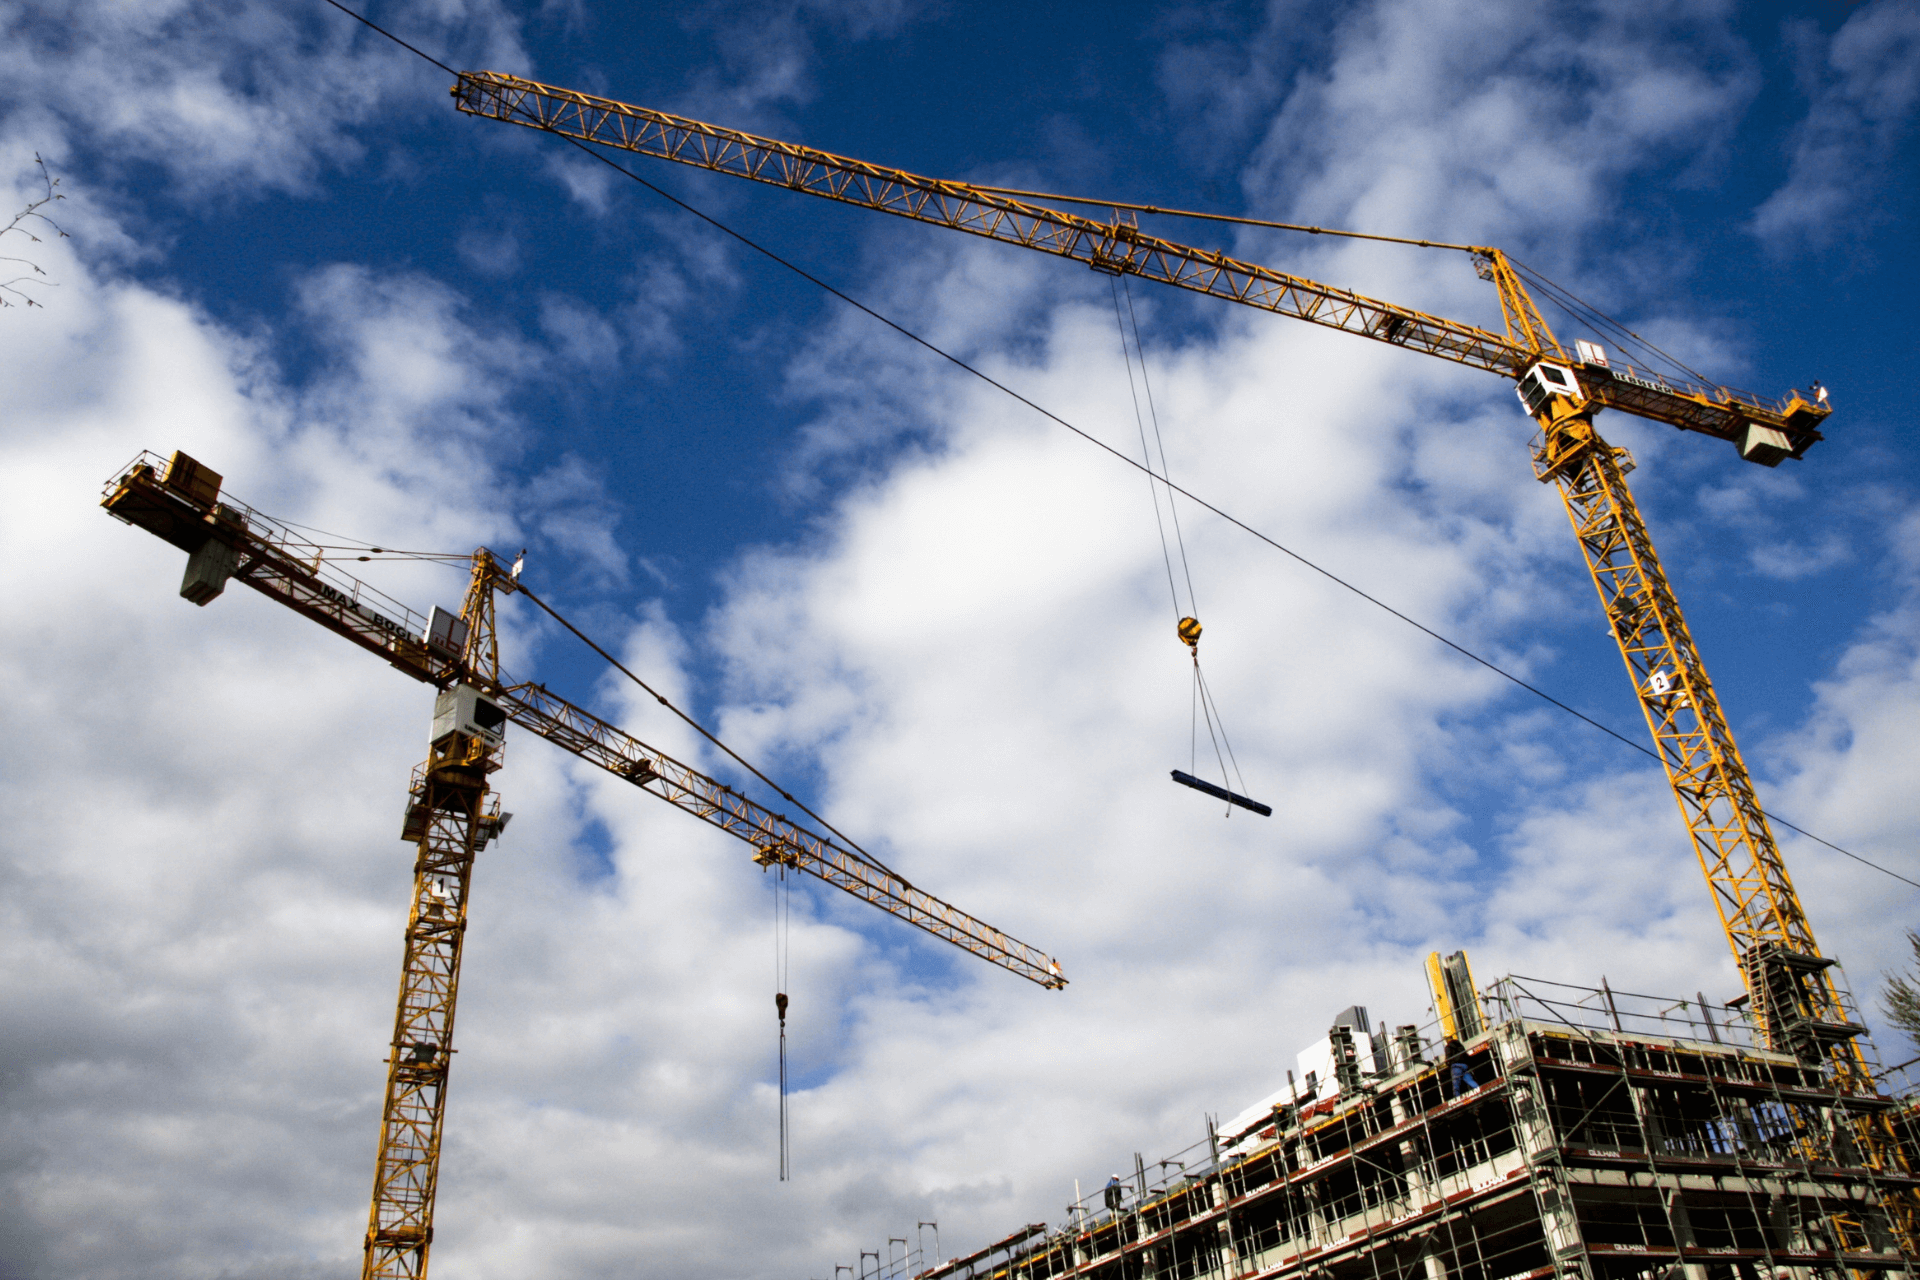 image of a crane lifting a beam on a construction site